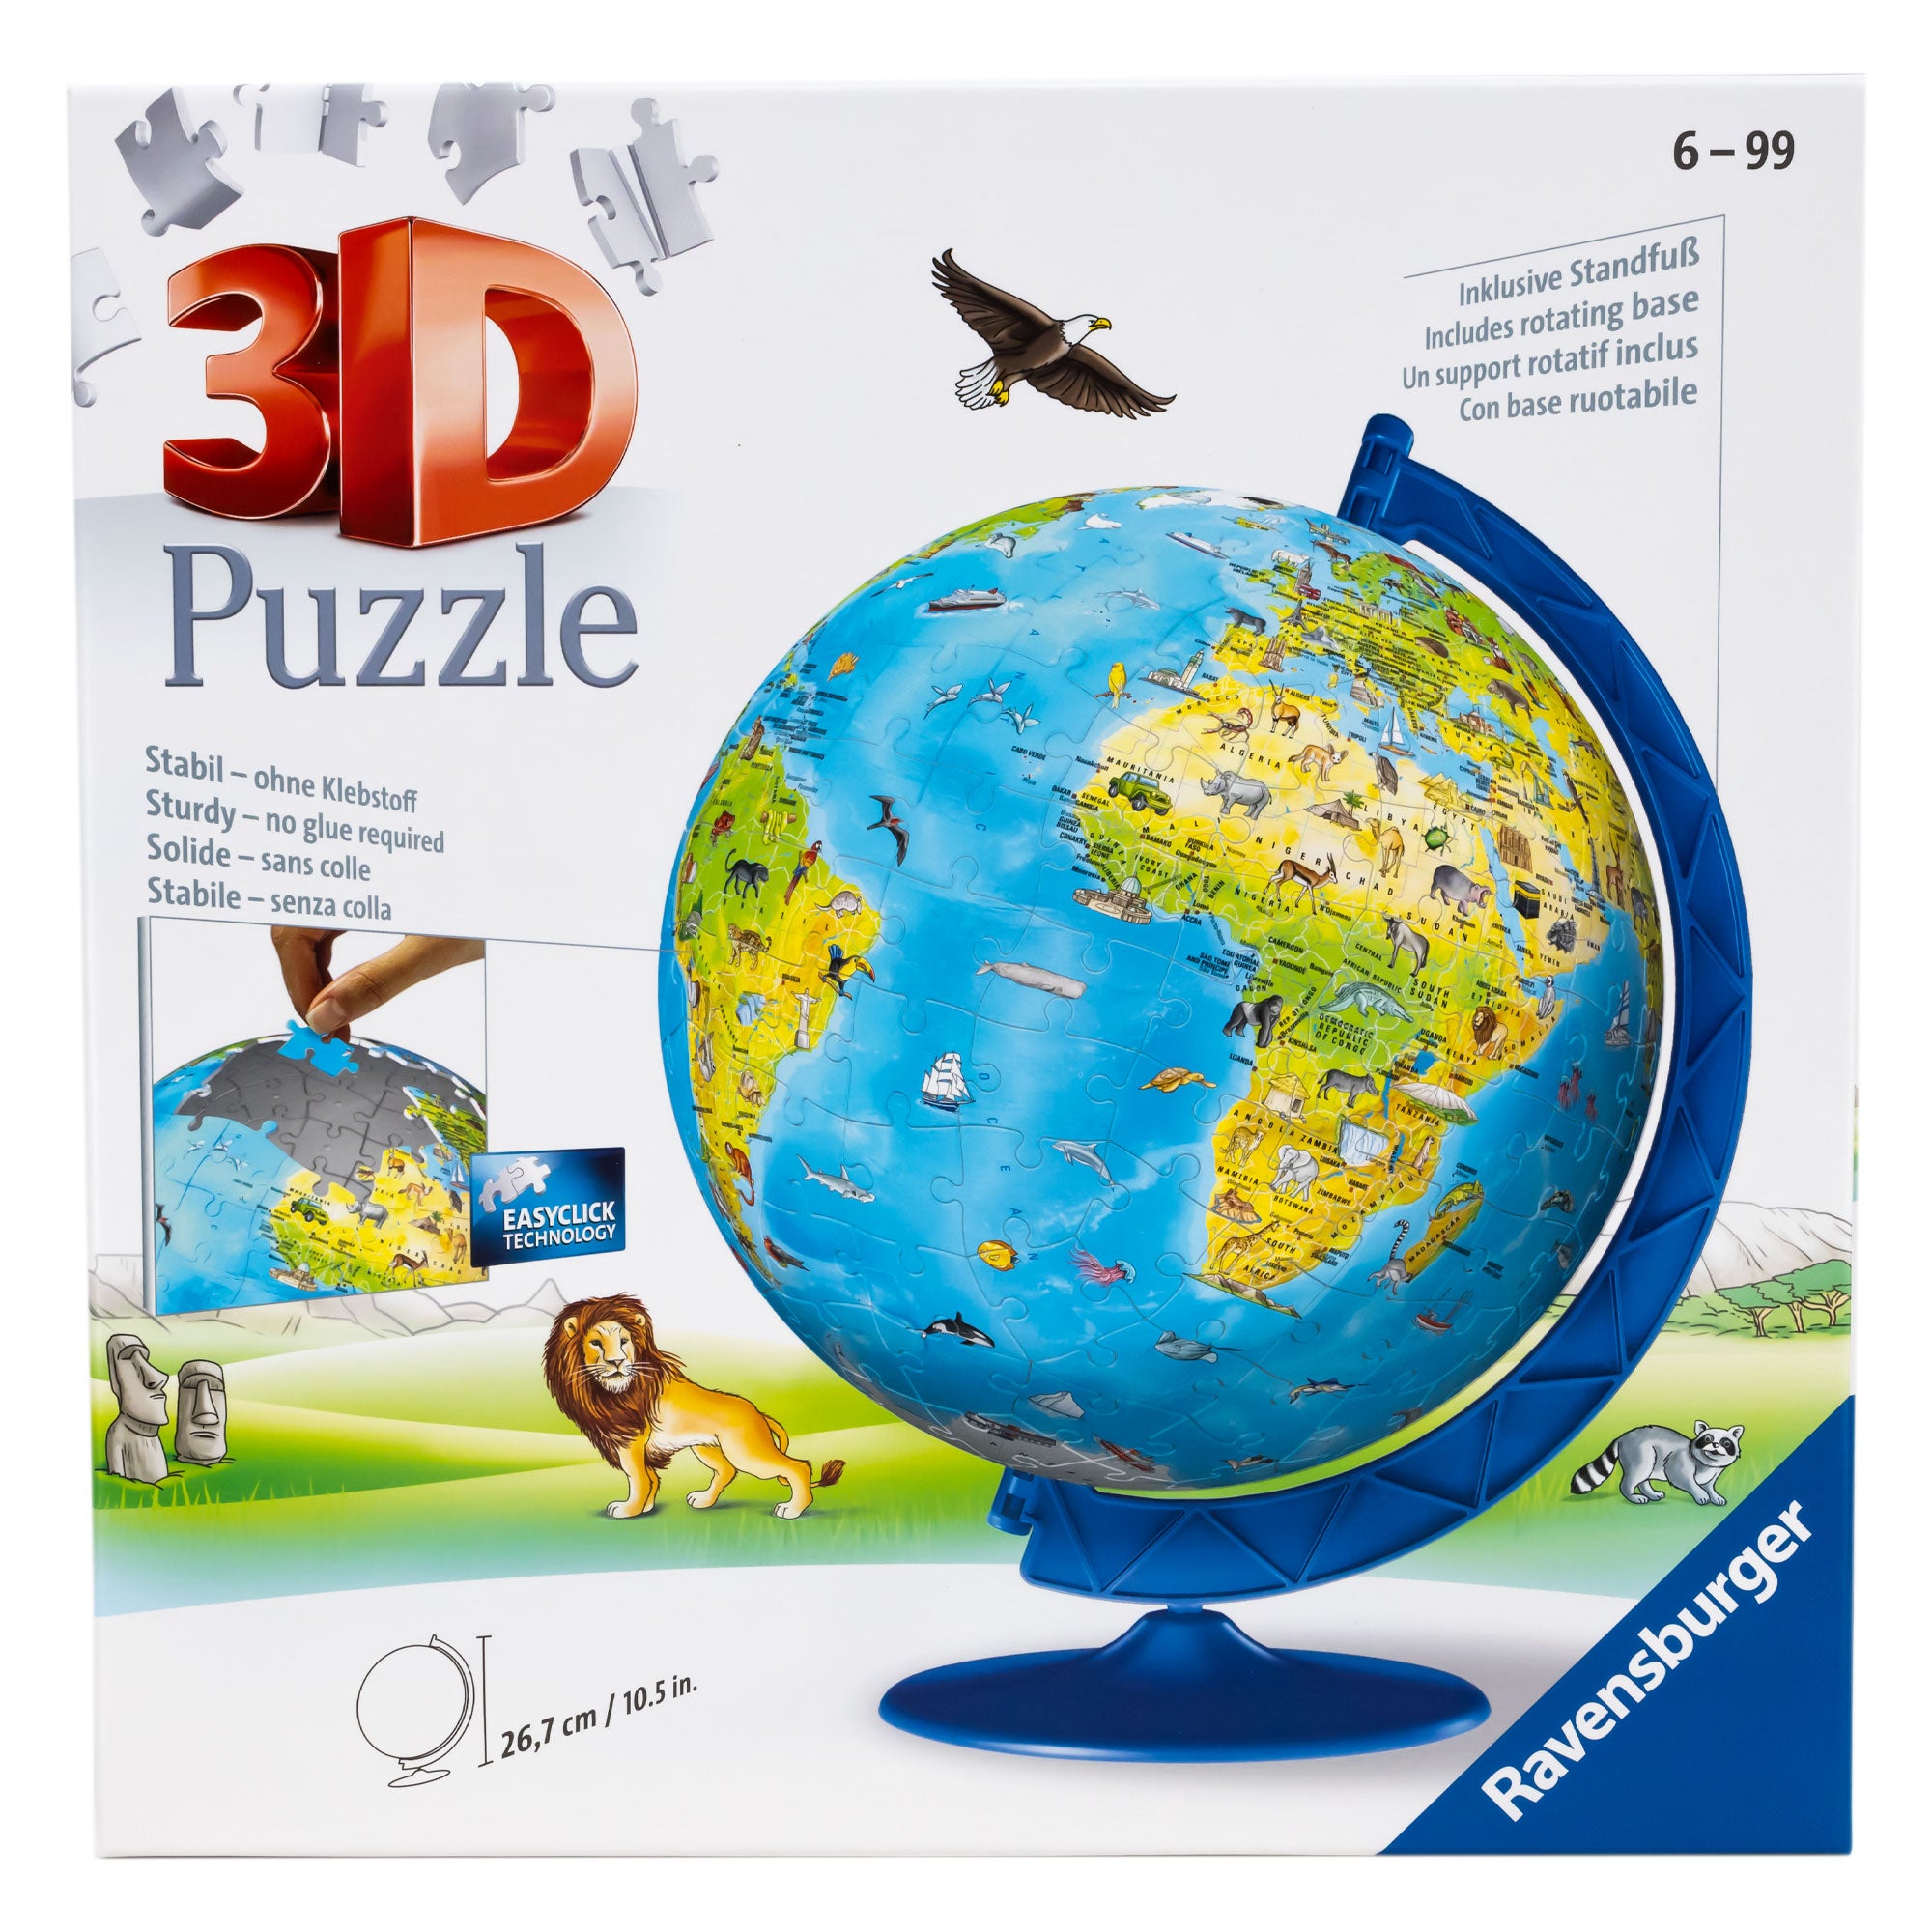 The Puzzleball Globe 180 piece set box. The box cover shows the completed globe puzzle on the blue stand included. The portion of the globe showing is Africa and South America. There is a picture to the left of a hand putting a puzzle piece in place. The background shows illustrations of Easter Island statues, a lion, and a racoon on grassy hills with hills, trees, and mountains in the back. The text on the box indicates that the puzzle is 3 D and for ages 6 to 99. The globe is 10.5 inches tall.